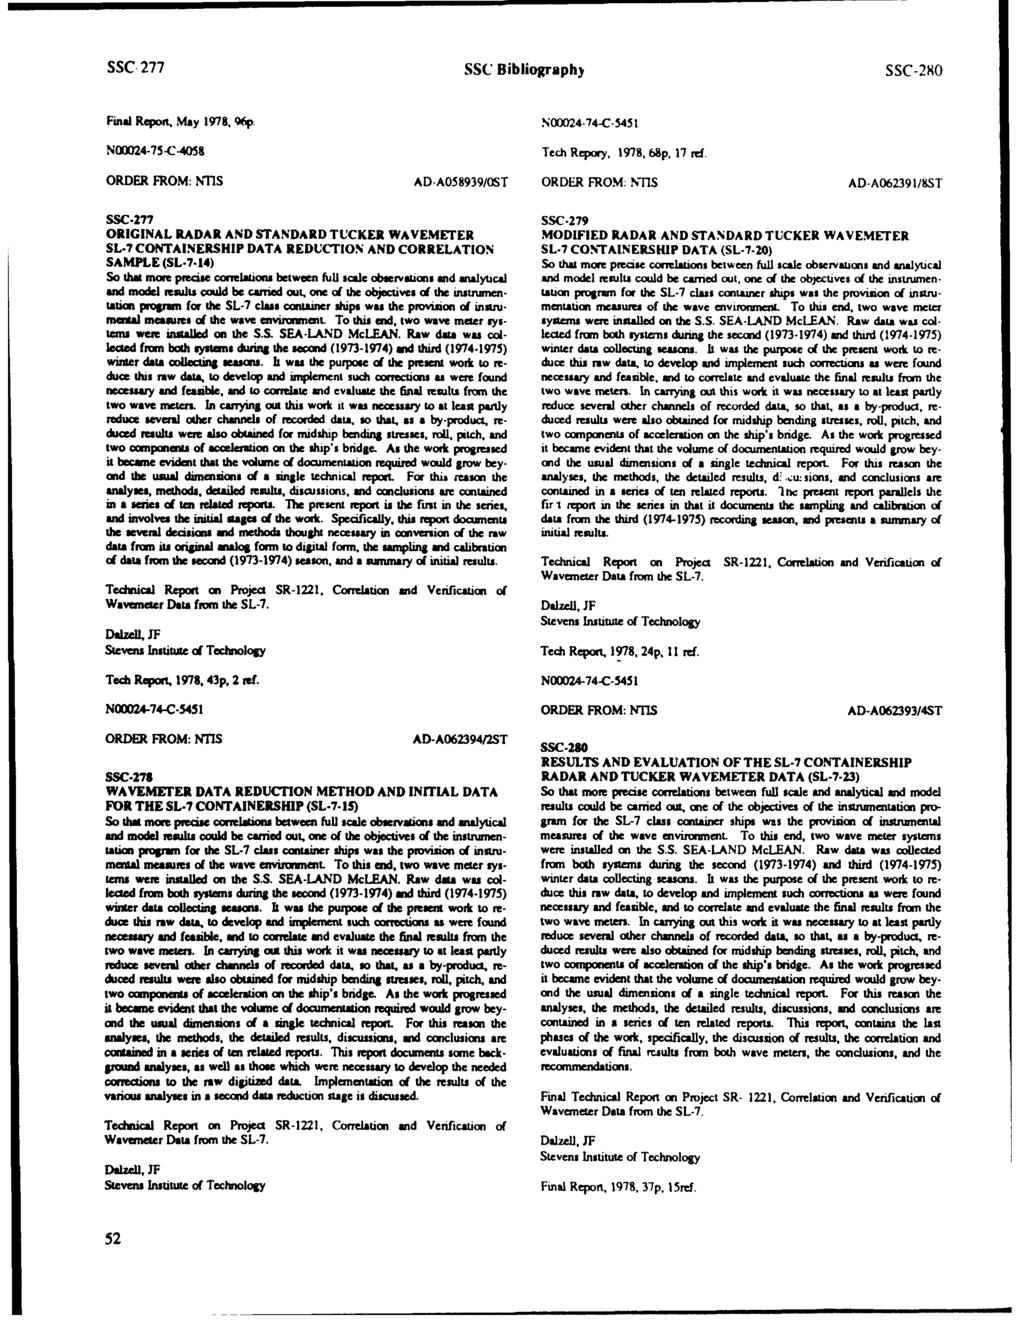 SSC 277 SSC Bibliography SSC-290 Final Report, May 1978. Q6p N00024-75-C-4058 N00024-74-C-5451 Tech Repory, 1978, 68p, 17 rd. ORDER FROM: NTIS AD-AO58939/OST ORDER FROM: NTIS AD-A062391/9ST SSC.